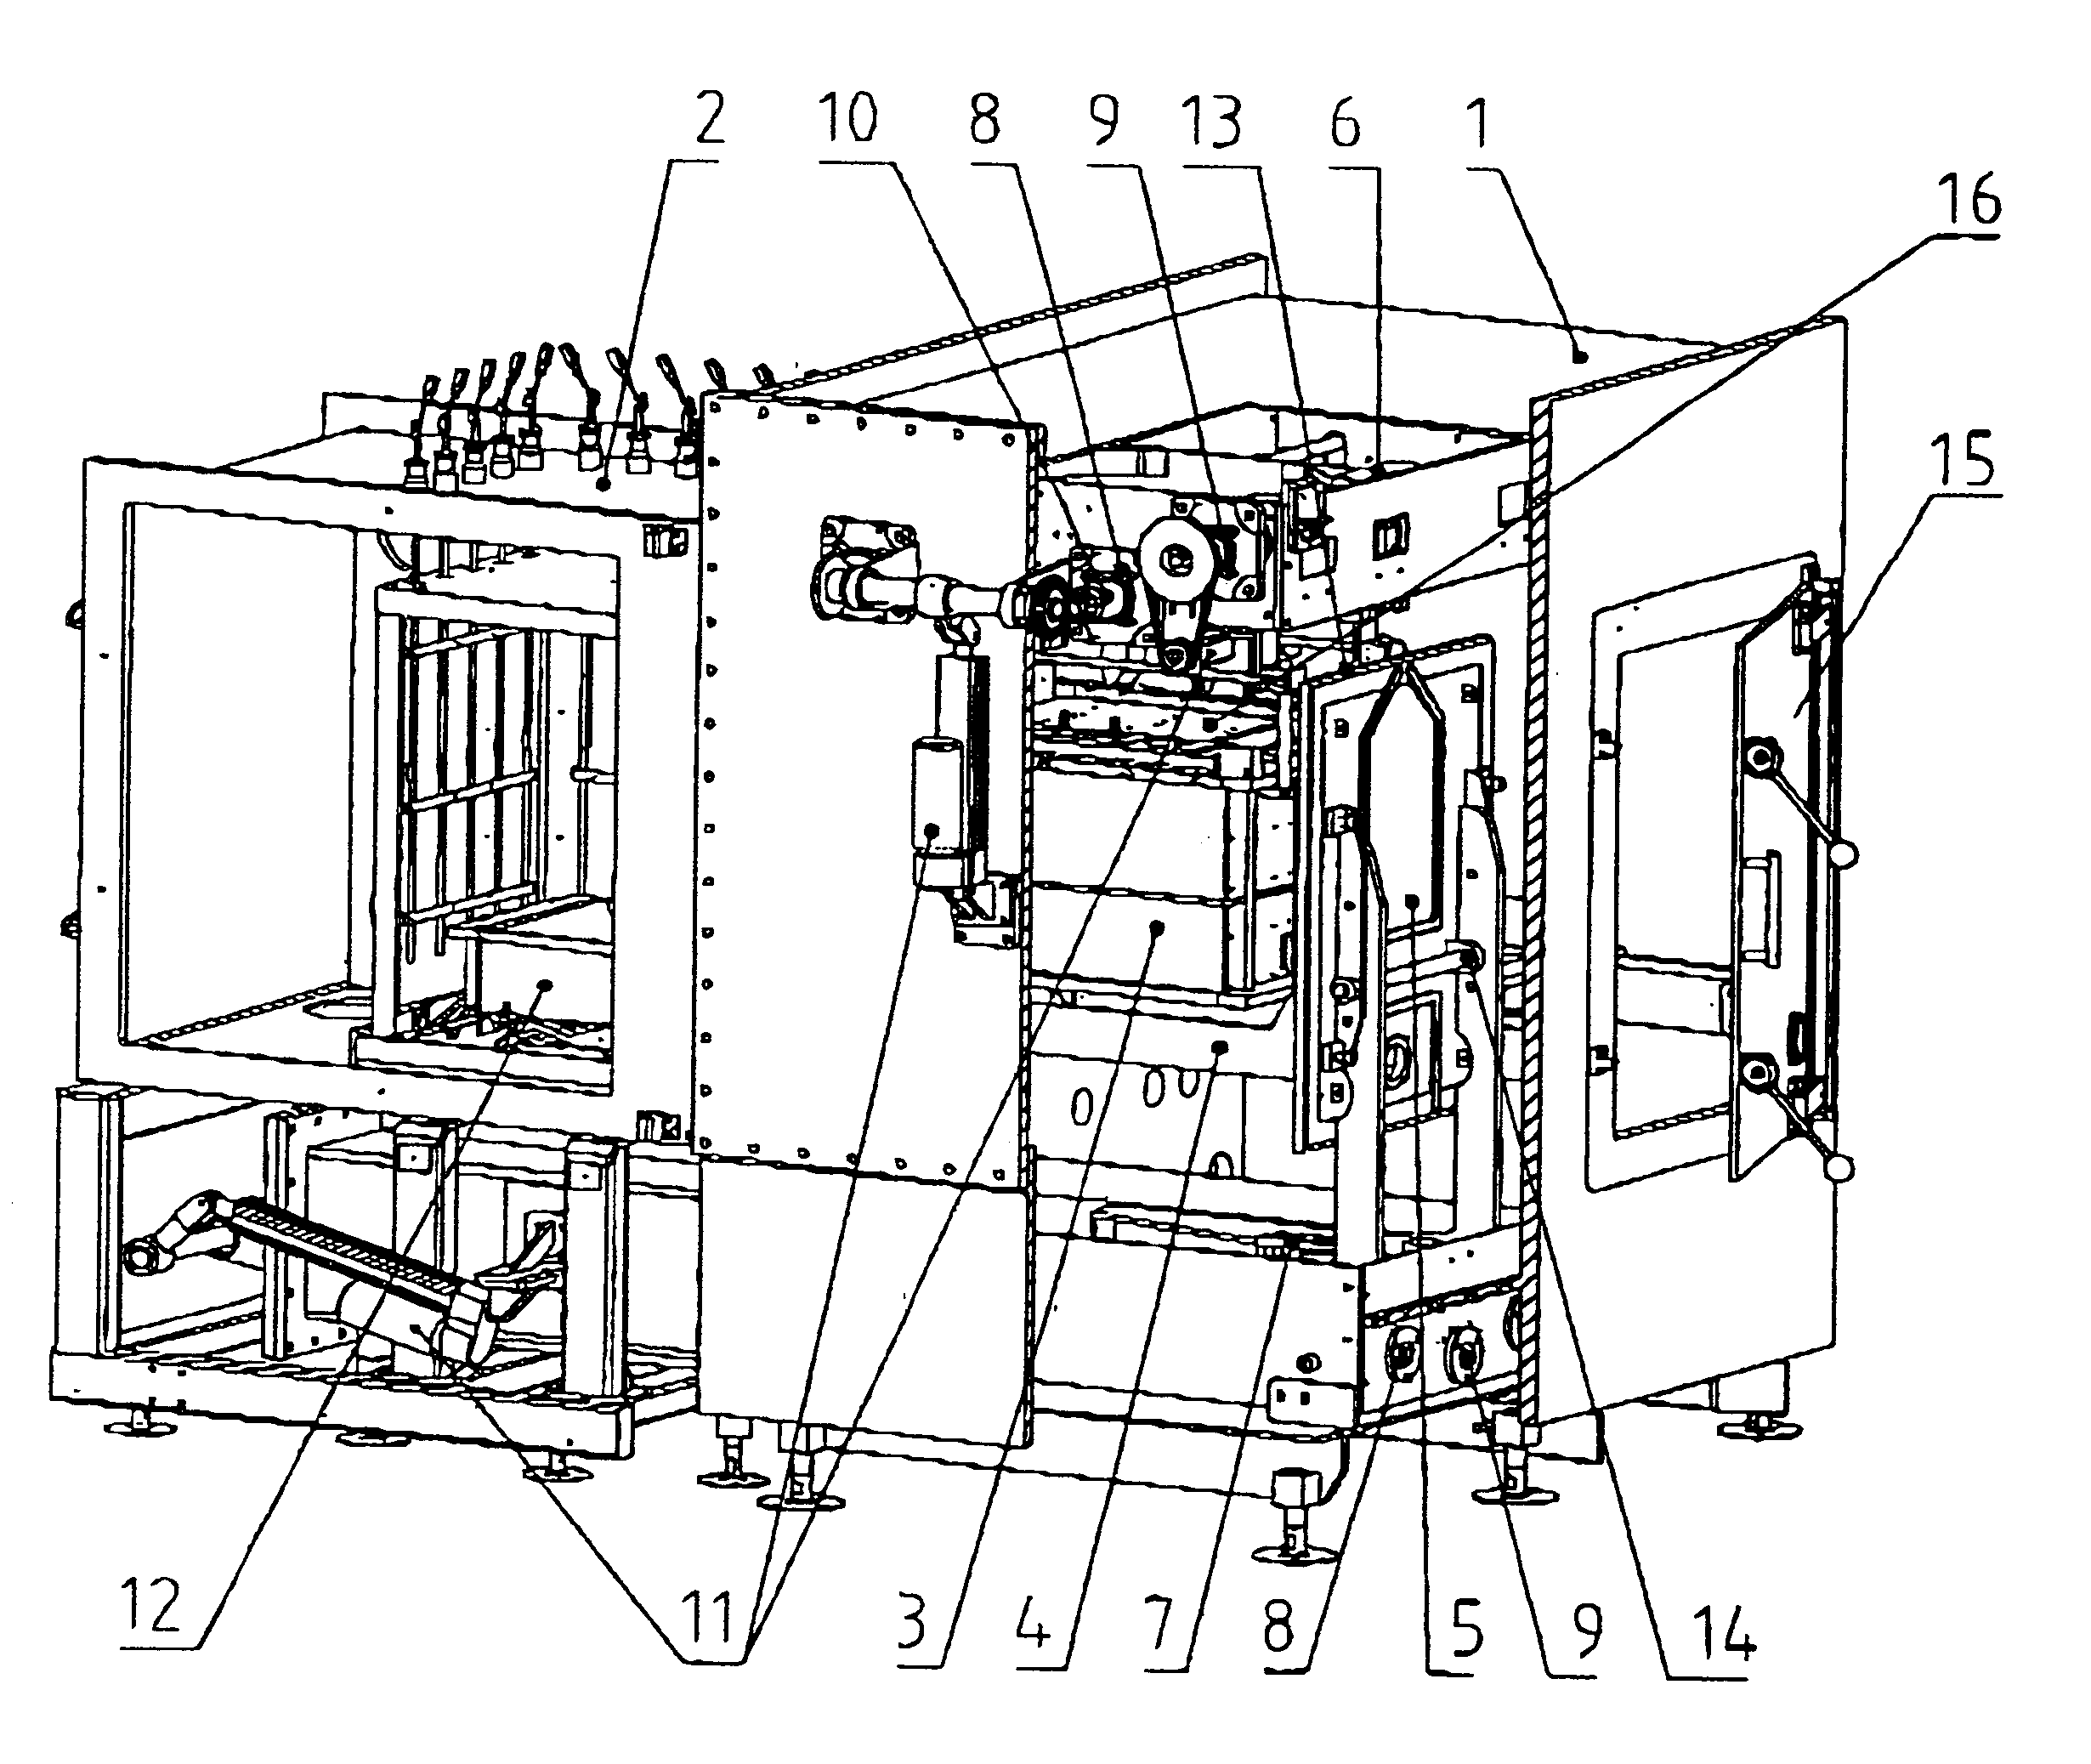 Apparatus for growing thin films